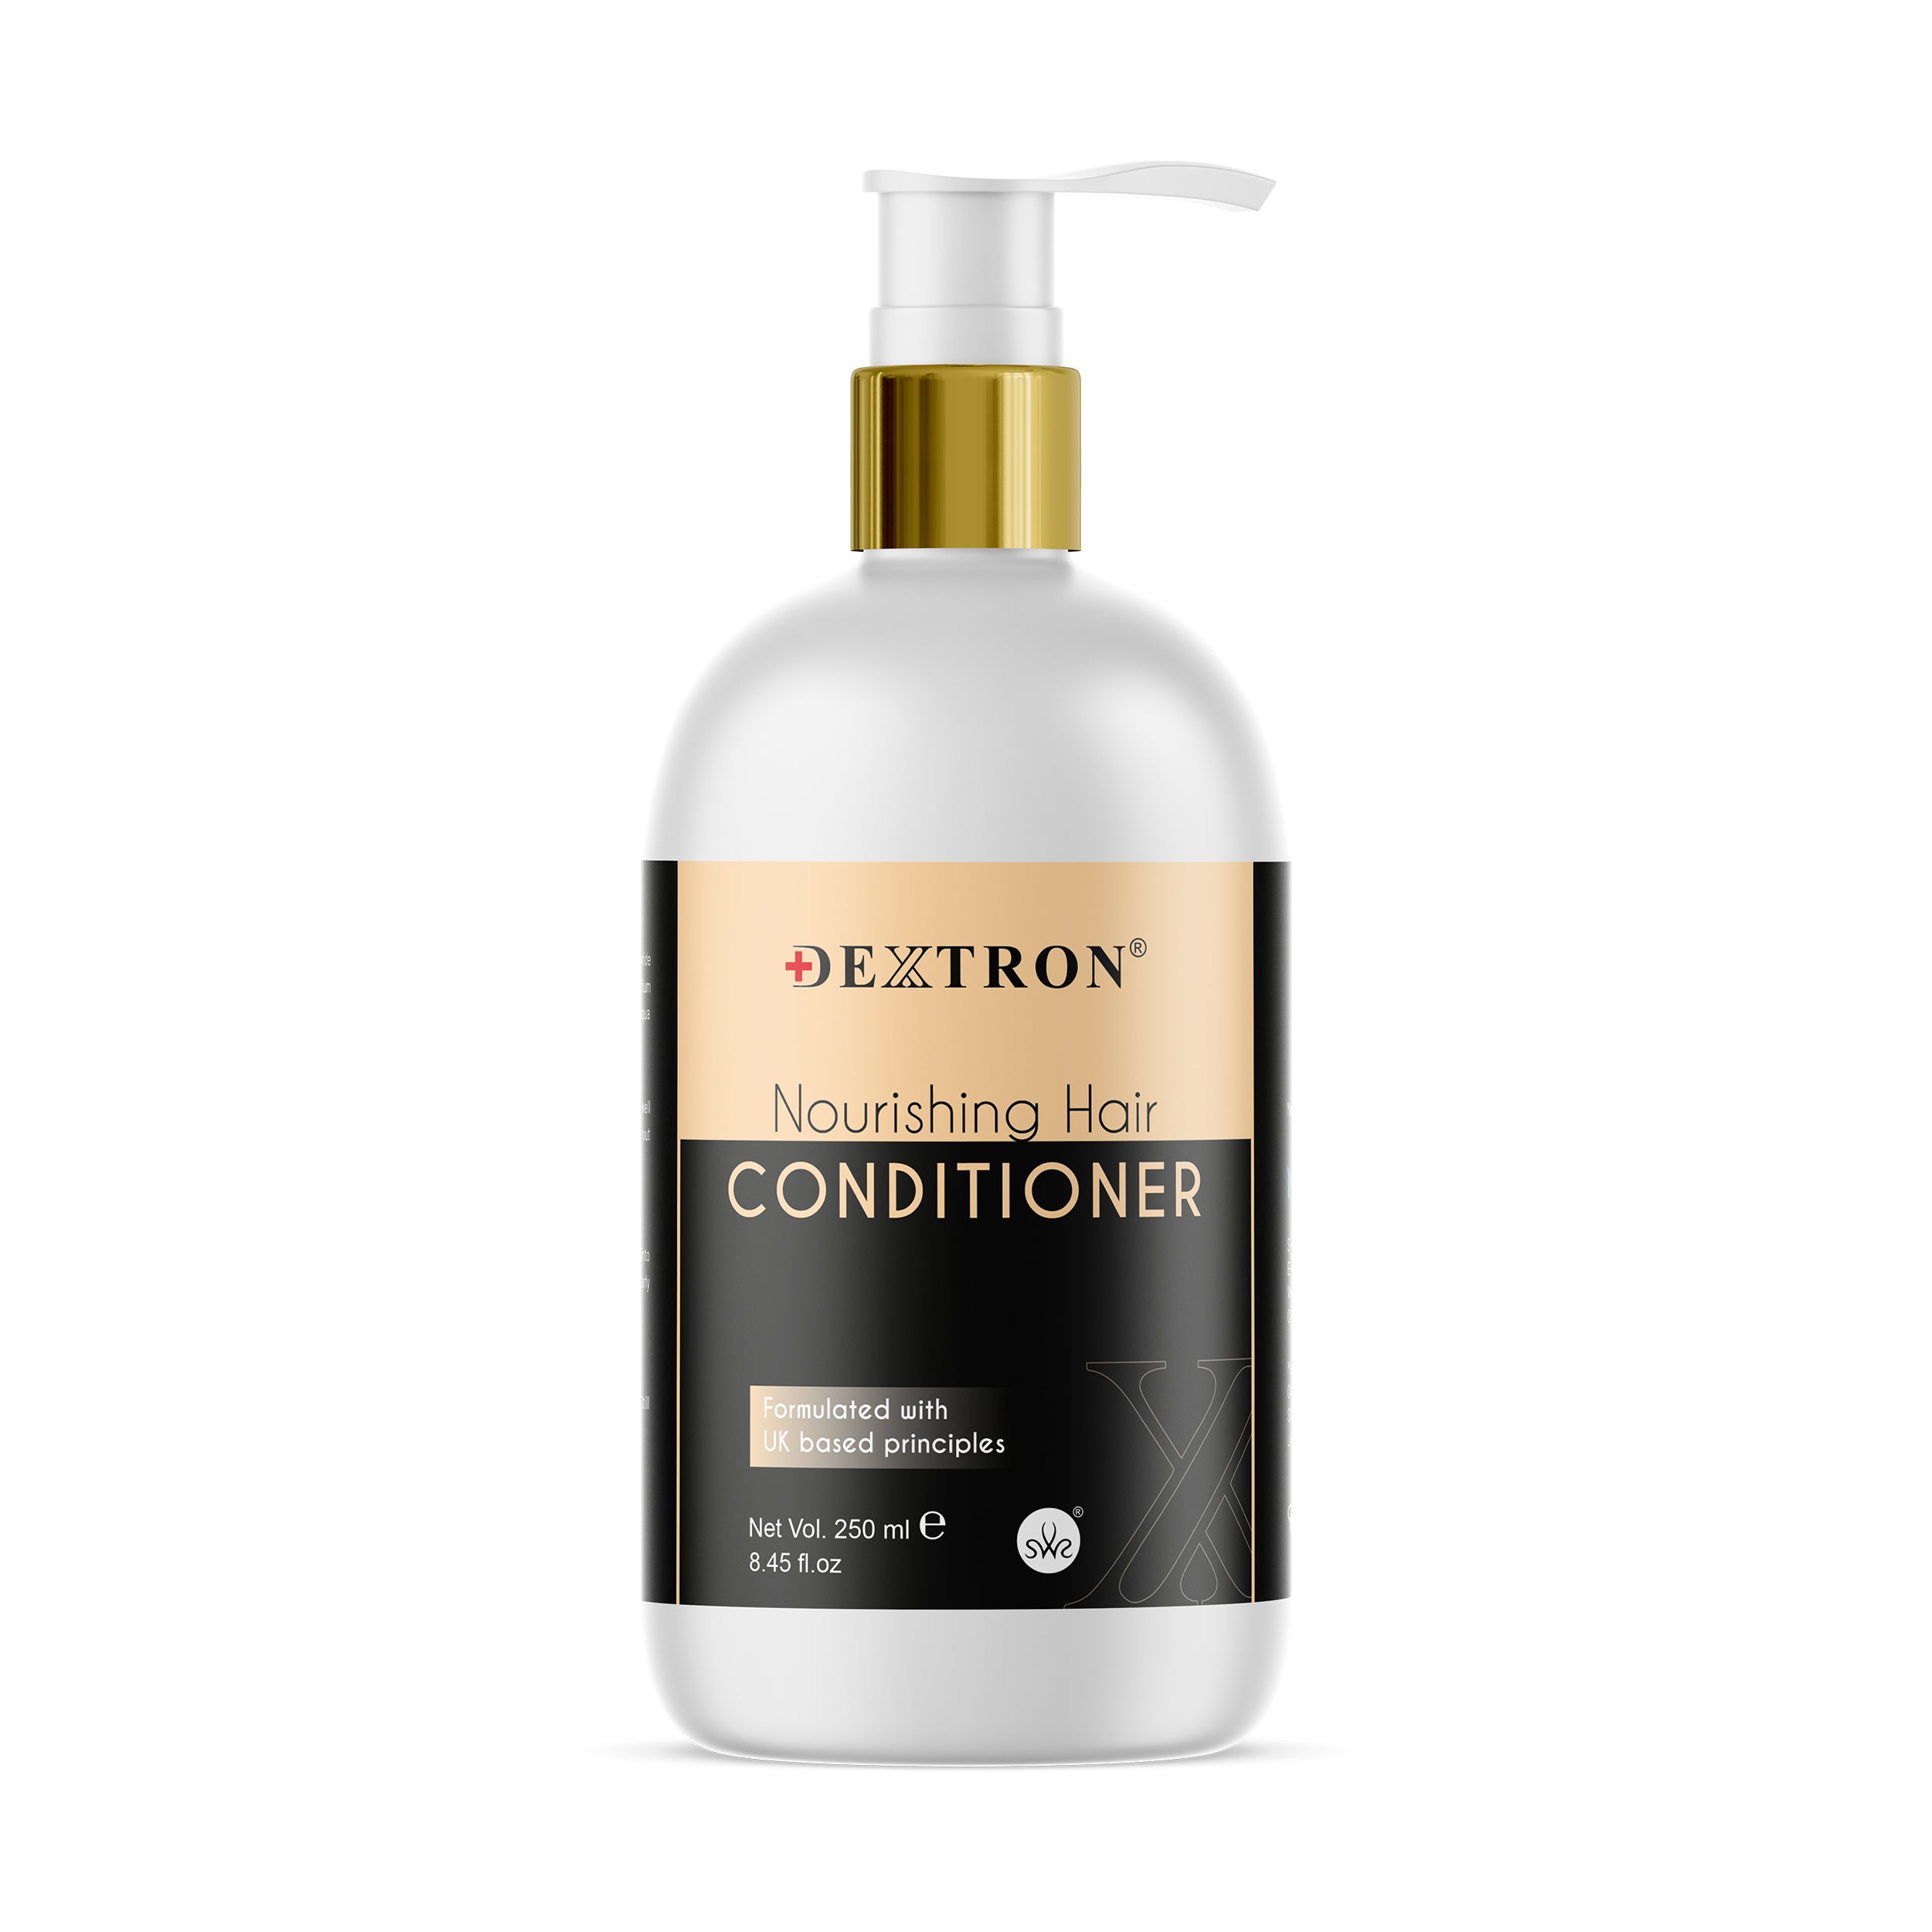 Nourishing Hair Conditioner with UK-Based Principles 250ml